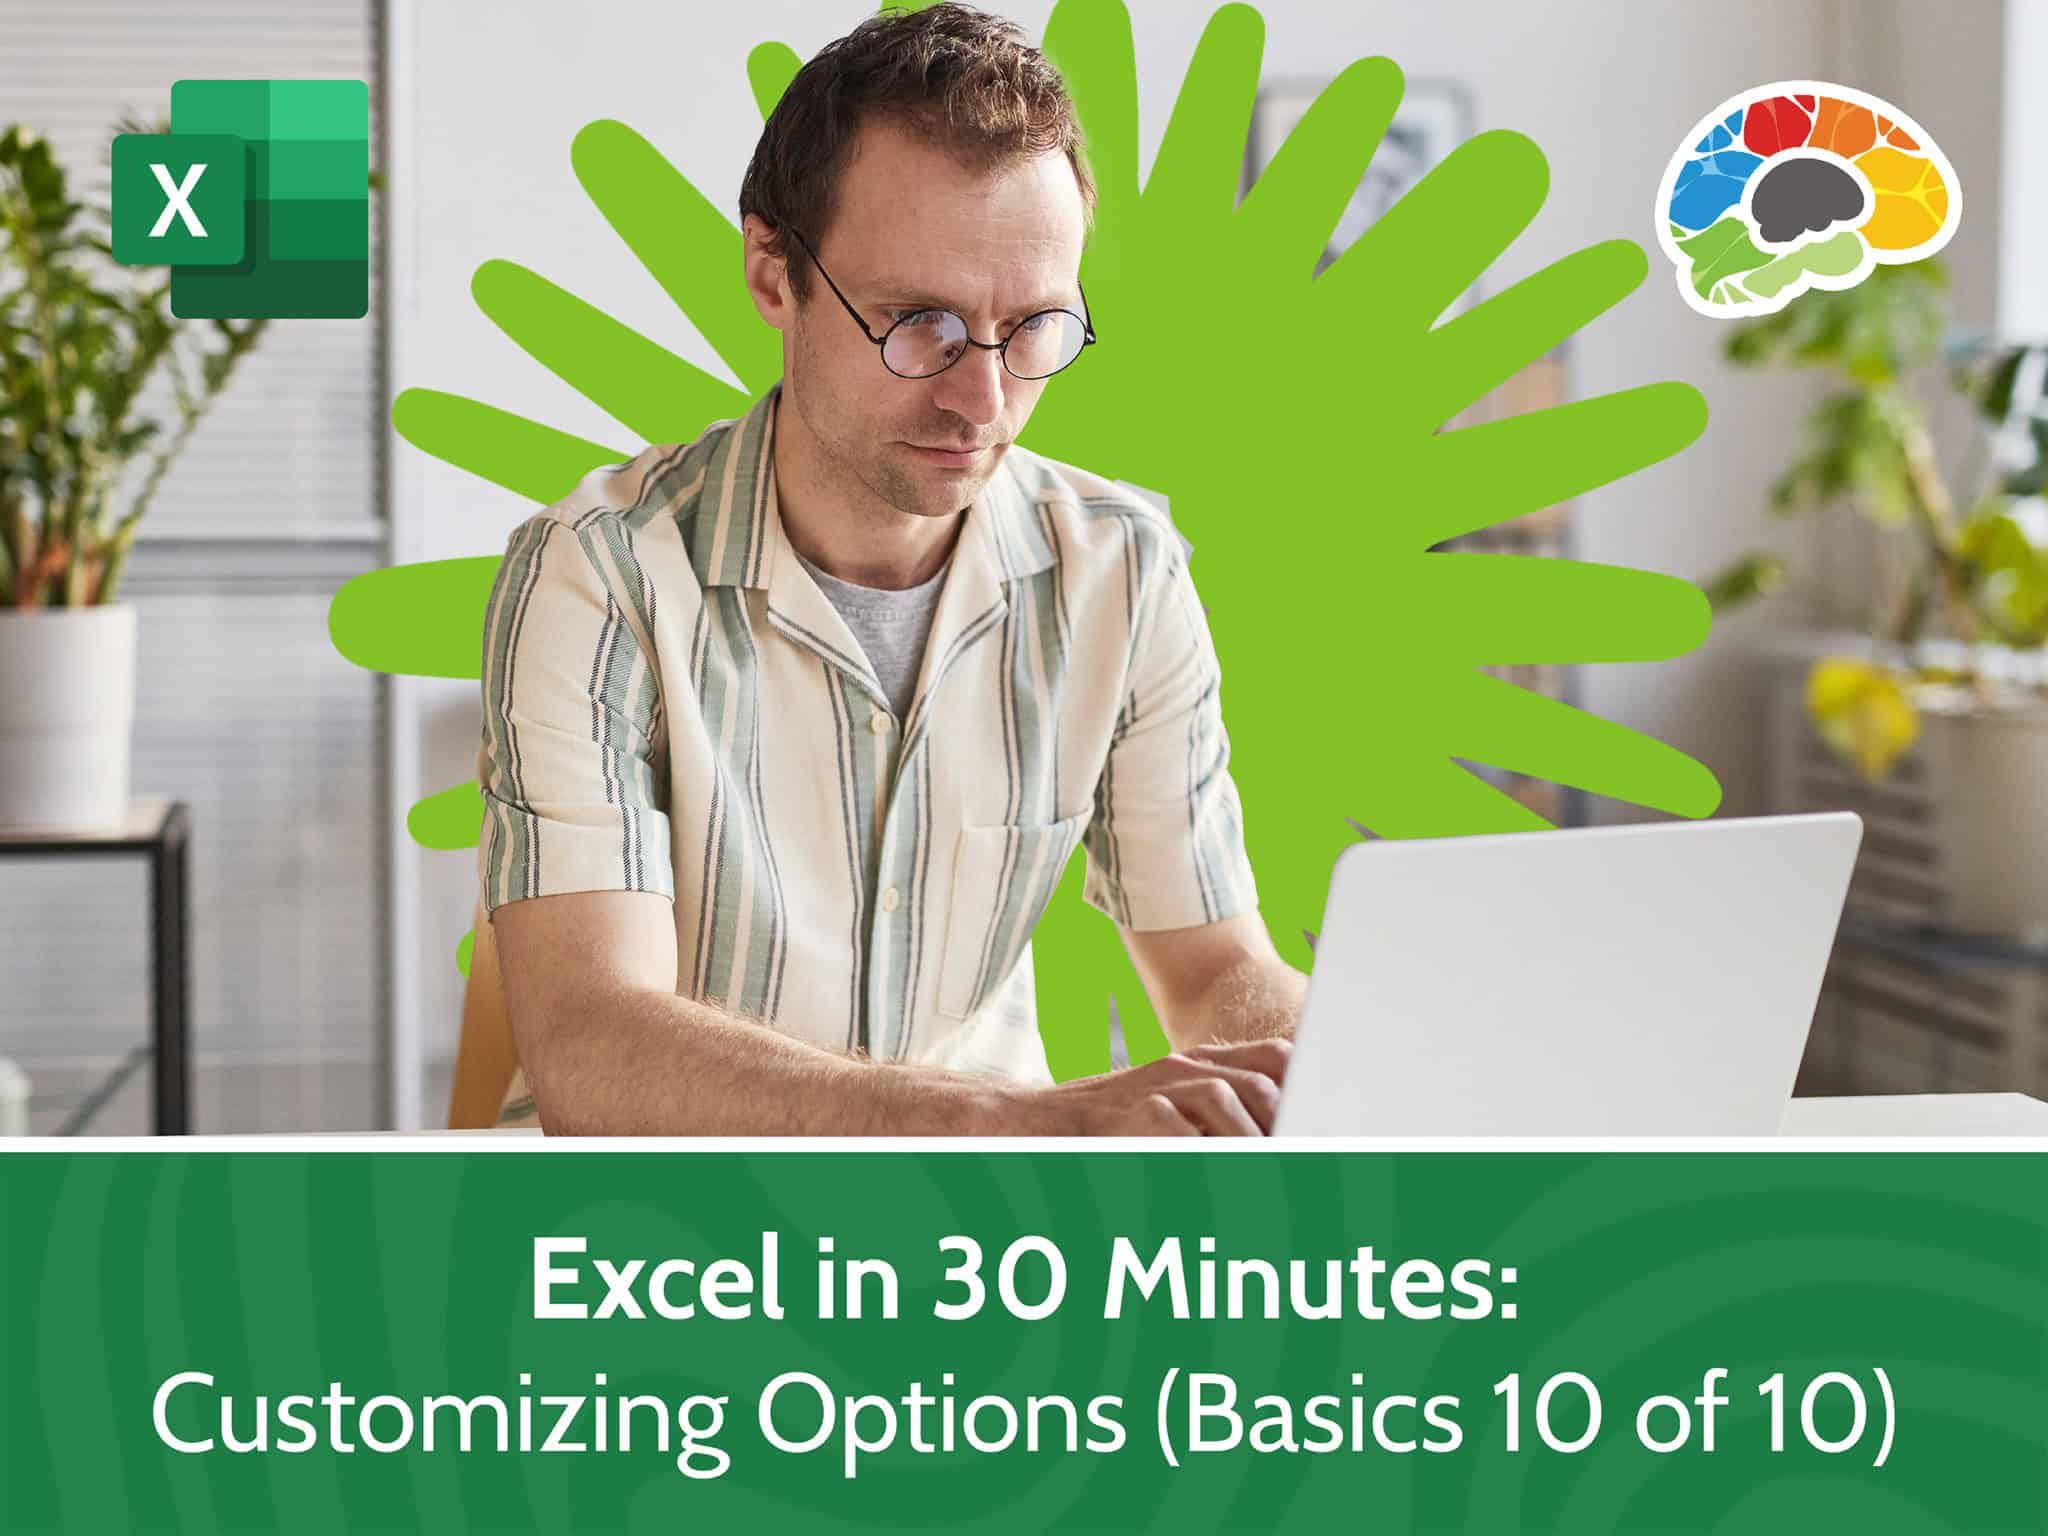 Excel in 30 Minutes Customizing Options Basics 10 of 10 scaled